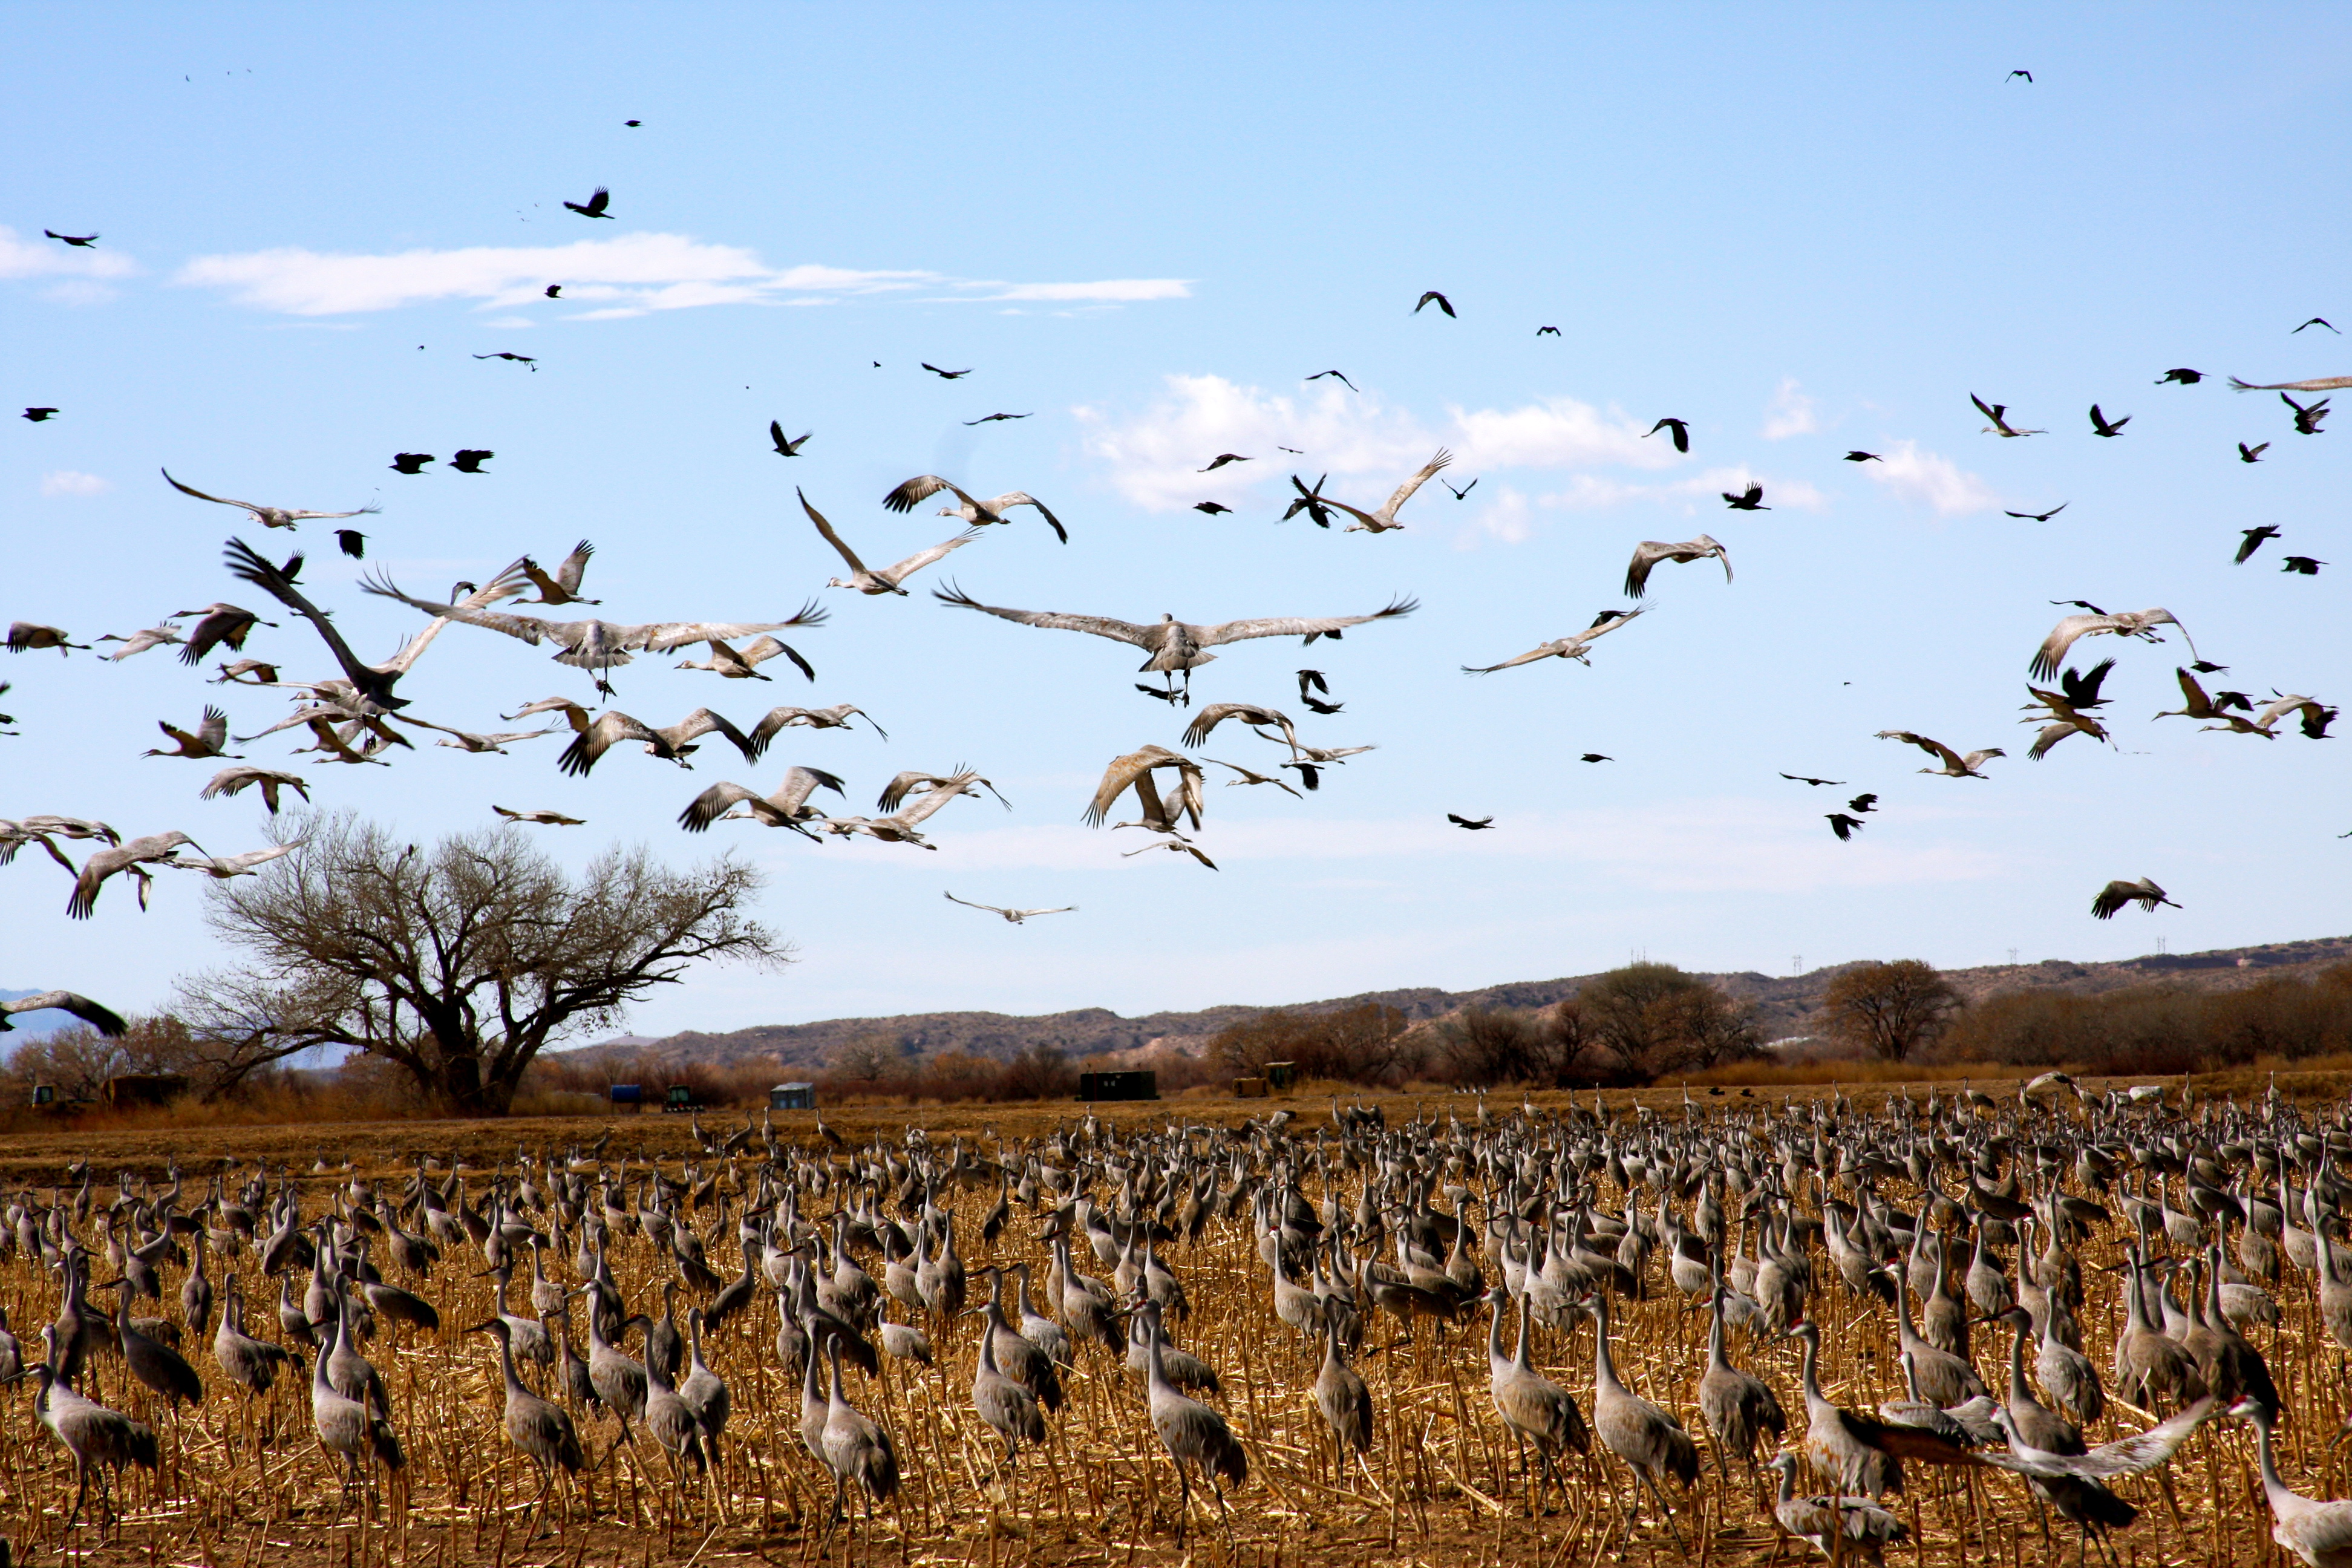 Larged-winged birds called sandhill cranes arrive in fields to feed at Bosque del Apache National Wildlife Refuge.